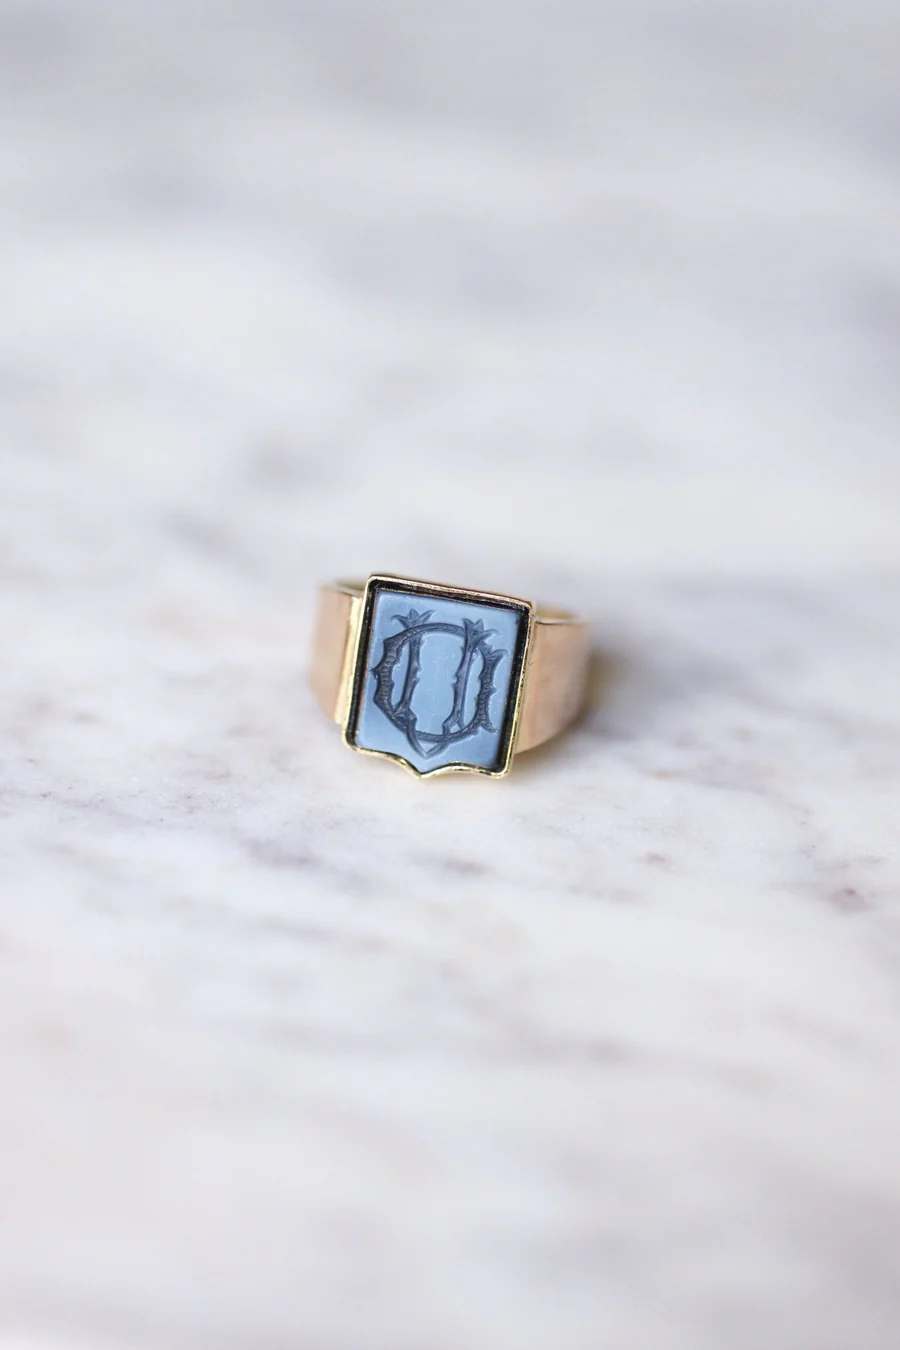 Antique monogrammed onyx nicolo intaglio knight ring on pink gold - Galerie Pénélope